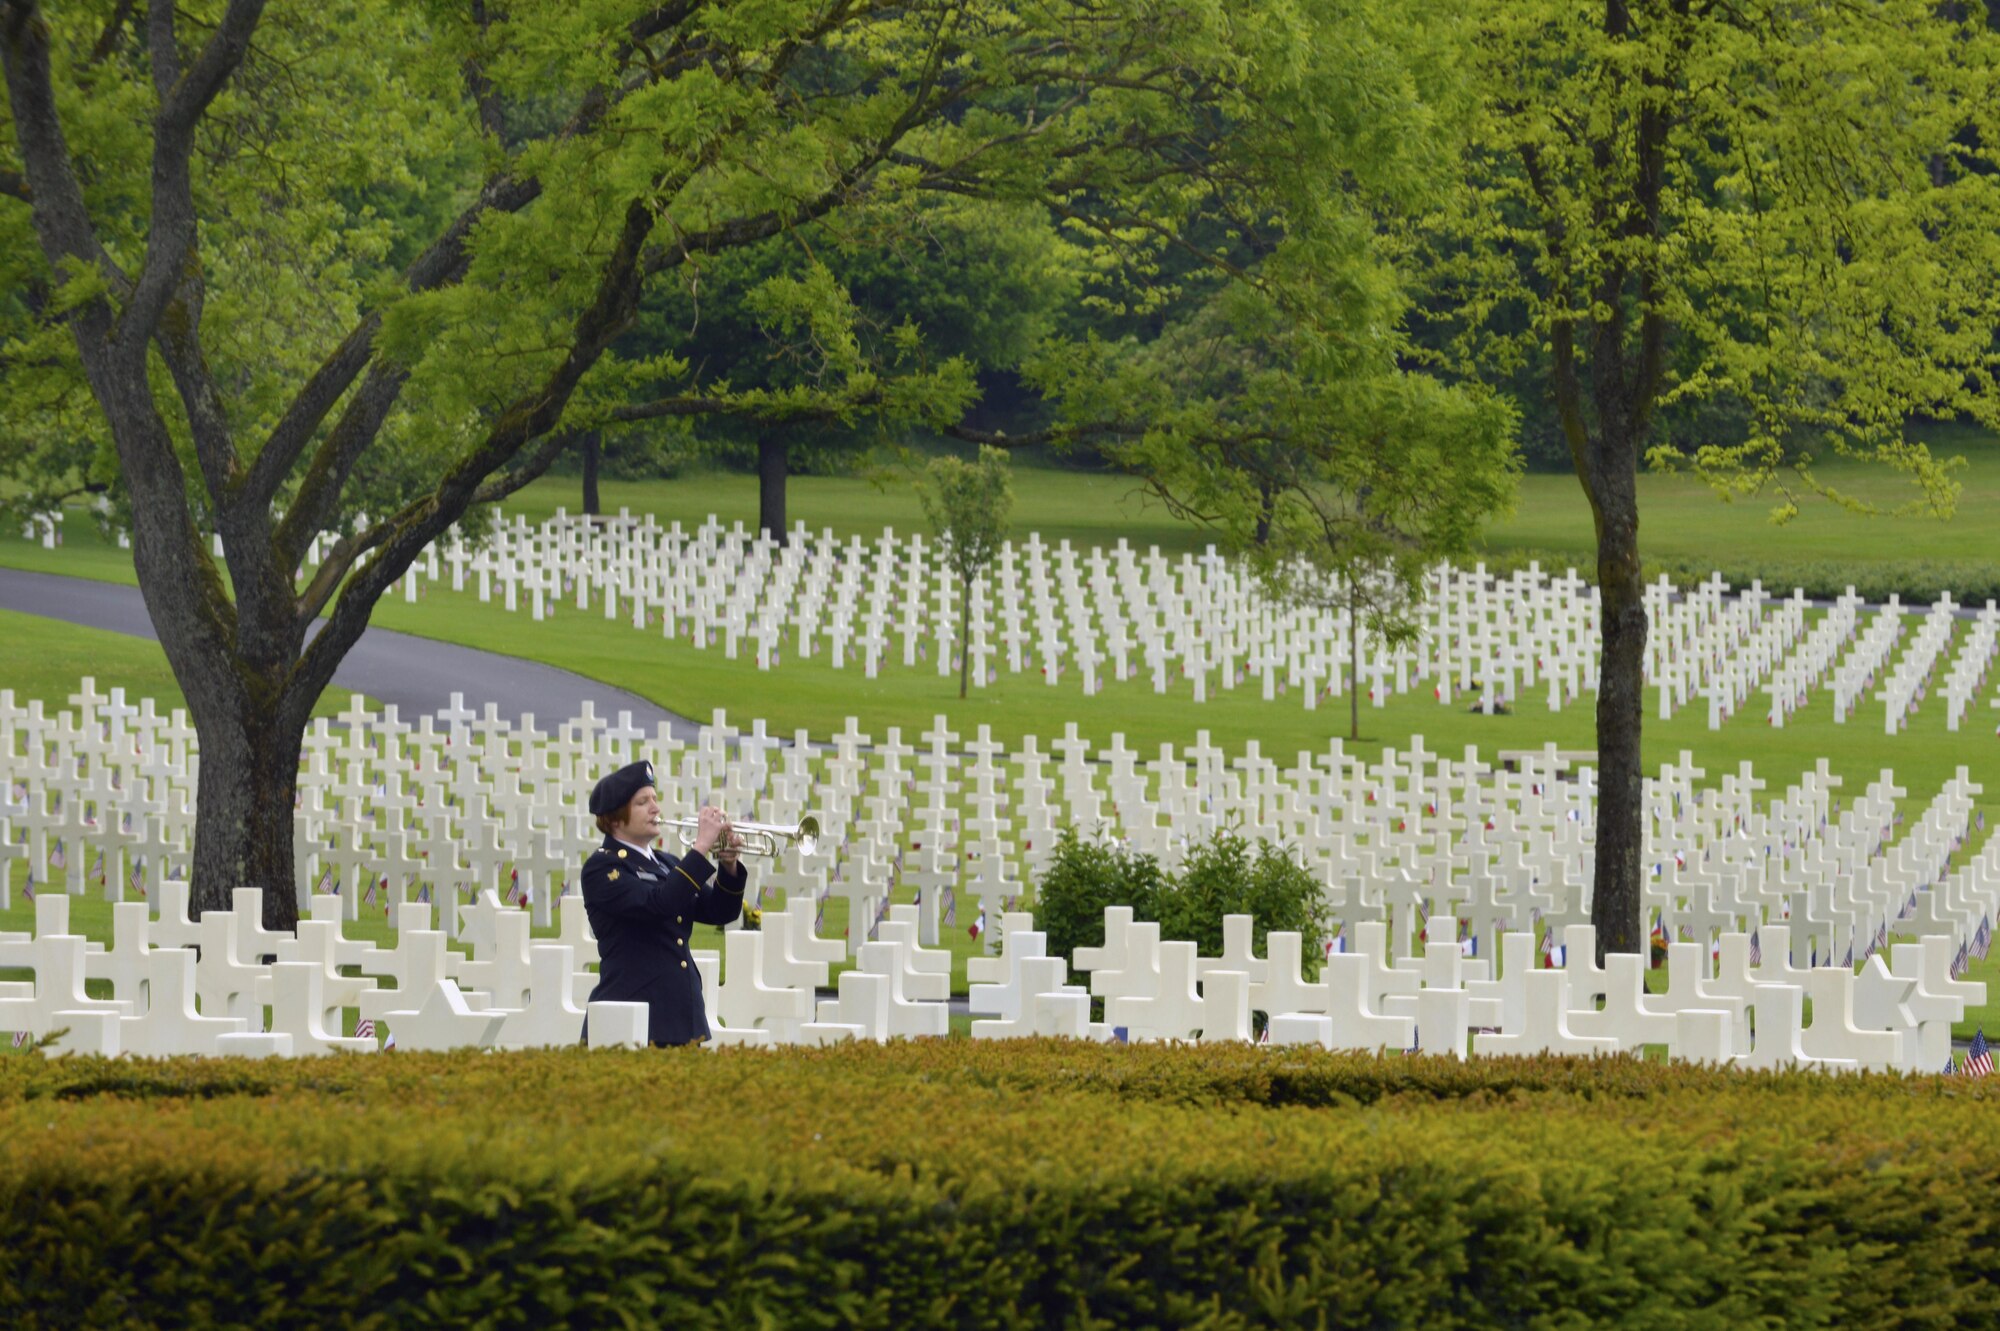 A bugler from the 16th Sustainment Brigade plays Taps during a Memorial Day ceremony May 29, 2016, at Lorraine American Cemetery and Memorial, in St. Avold, France. The cermony honored the sacrifices of fallen American servicemembers. (U.S. Air Force photo/Staff Sgt. Sharida Jackson)